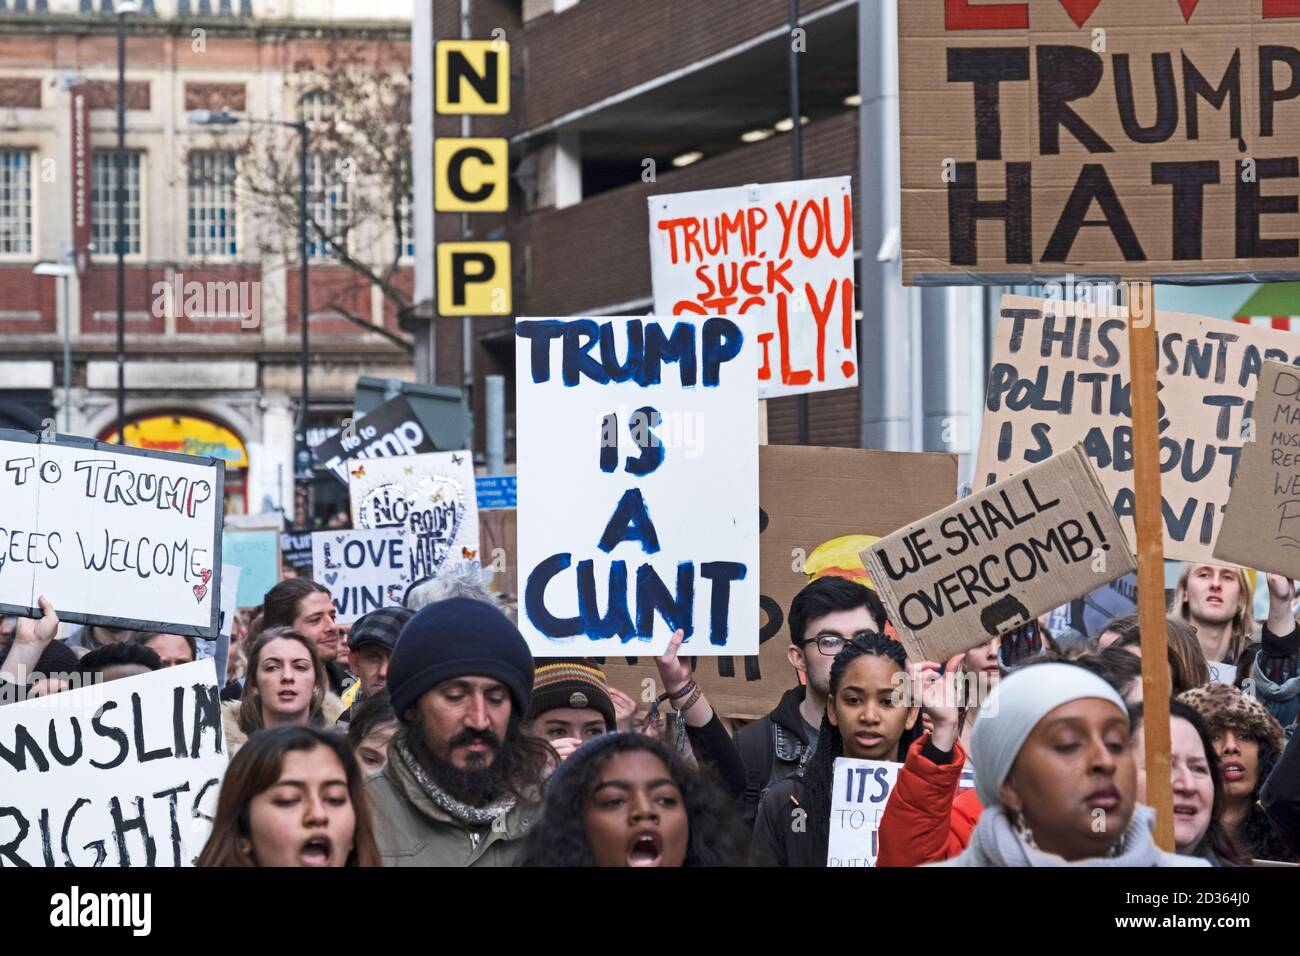 Protesters hold placards at a demonstration against US president Donald Trump’s immigration policies and his proposed visit to the UK in Bristol, UK on 4 February 2017 Stock Photo